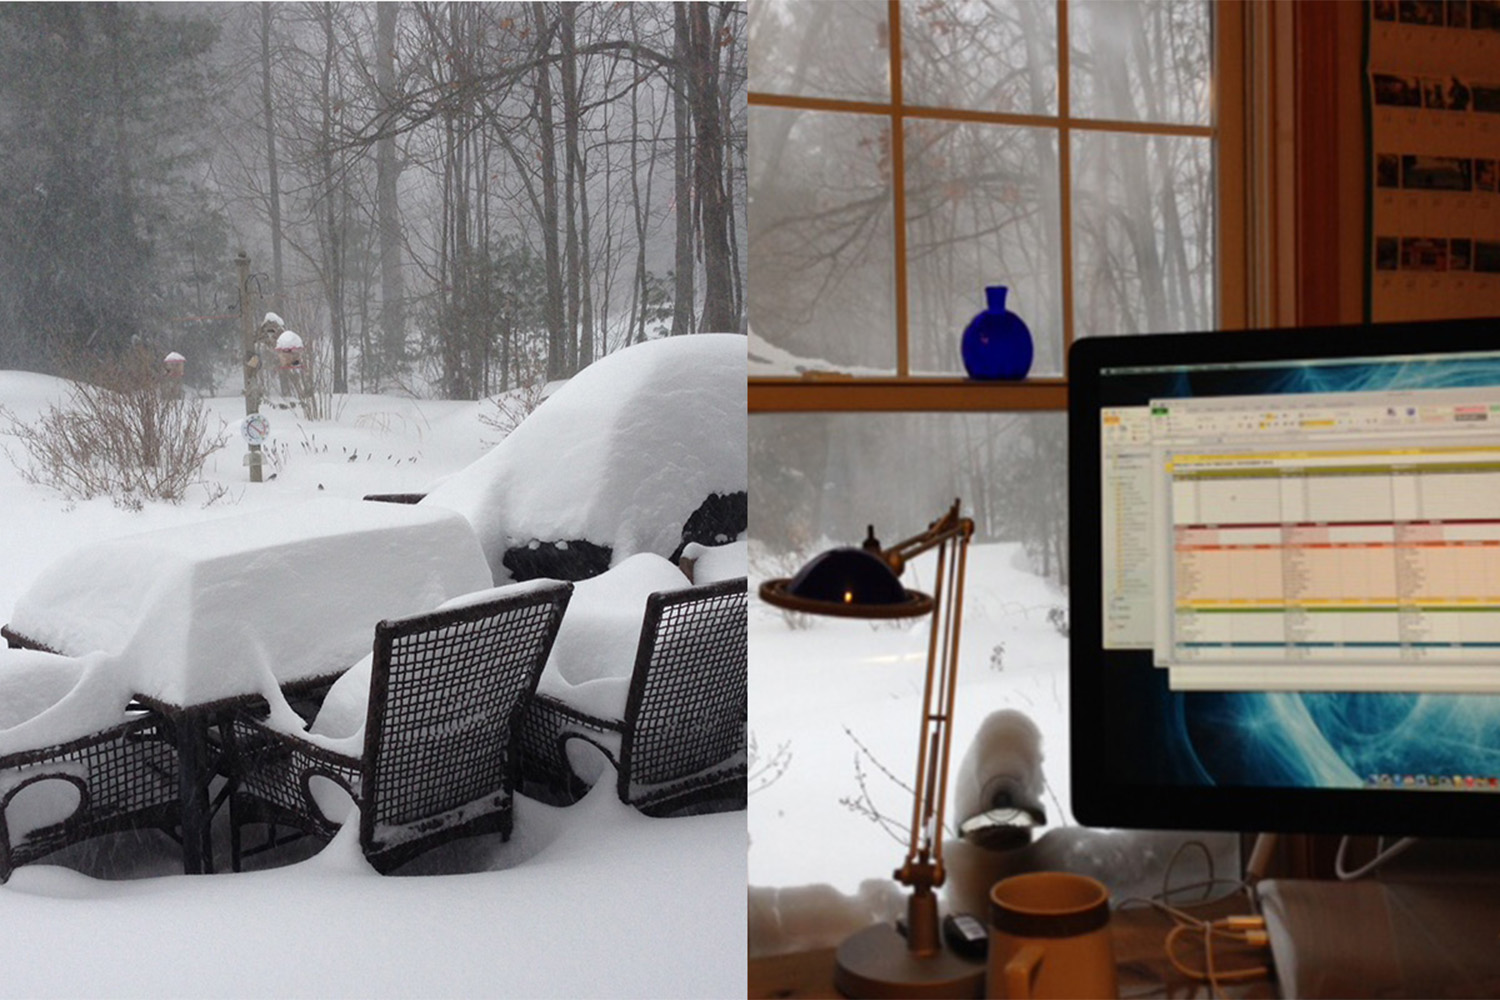 Amy took a break from her work to observe the snowfall in Rutland, MA.